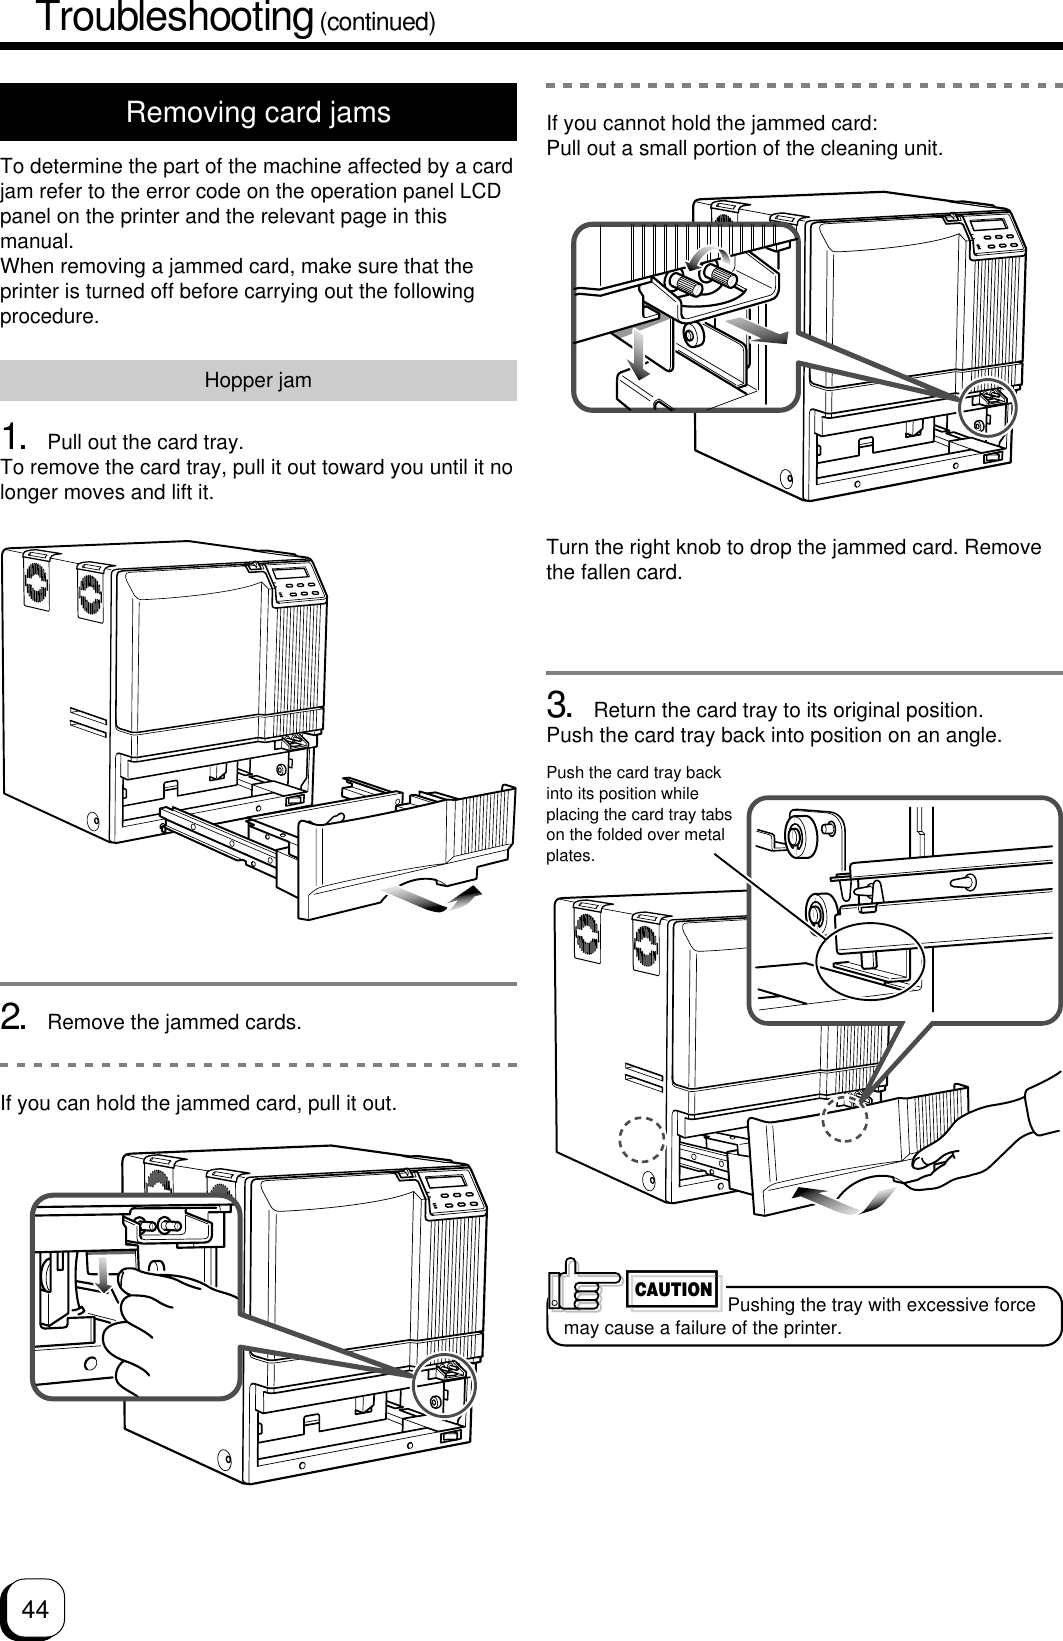 44Troubleshooting (continued)Removing card jamsTo determine the part of the machine affected by a cardjam refer to the error code on the operation panel LCDpanel on the printer and the relevant page in thismanual.When removing a jammed card, make sure that theprinter is turned off before carrying out the followingprocedure.Hopper jam1. Pull out the card tray.To remove the card tray, pull it out toward you until it nolonger moves and lift it.2. Remove the jammed cards.If you can hold the jammed card, pull it out.3. Return the card tray to its original position.Push the card tray back into position on an angle.Push the card tray backinto its position whileplacing the card tray tabson the folded over metalplates.If you cannot hold the jammed card:Pull out a small portion of the cleaning unit.Turn the right knob to drop the jammed card. Removethe fallen card.Pushing the tray with excessive forcemay cause a failure of the printer.CAUTION